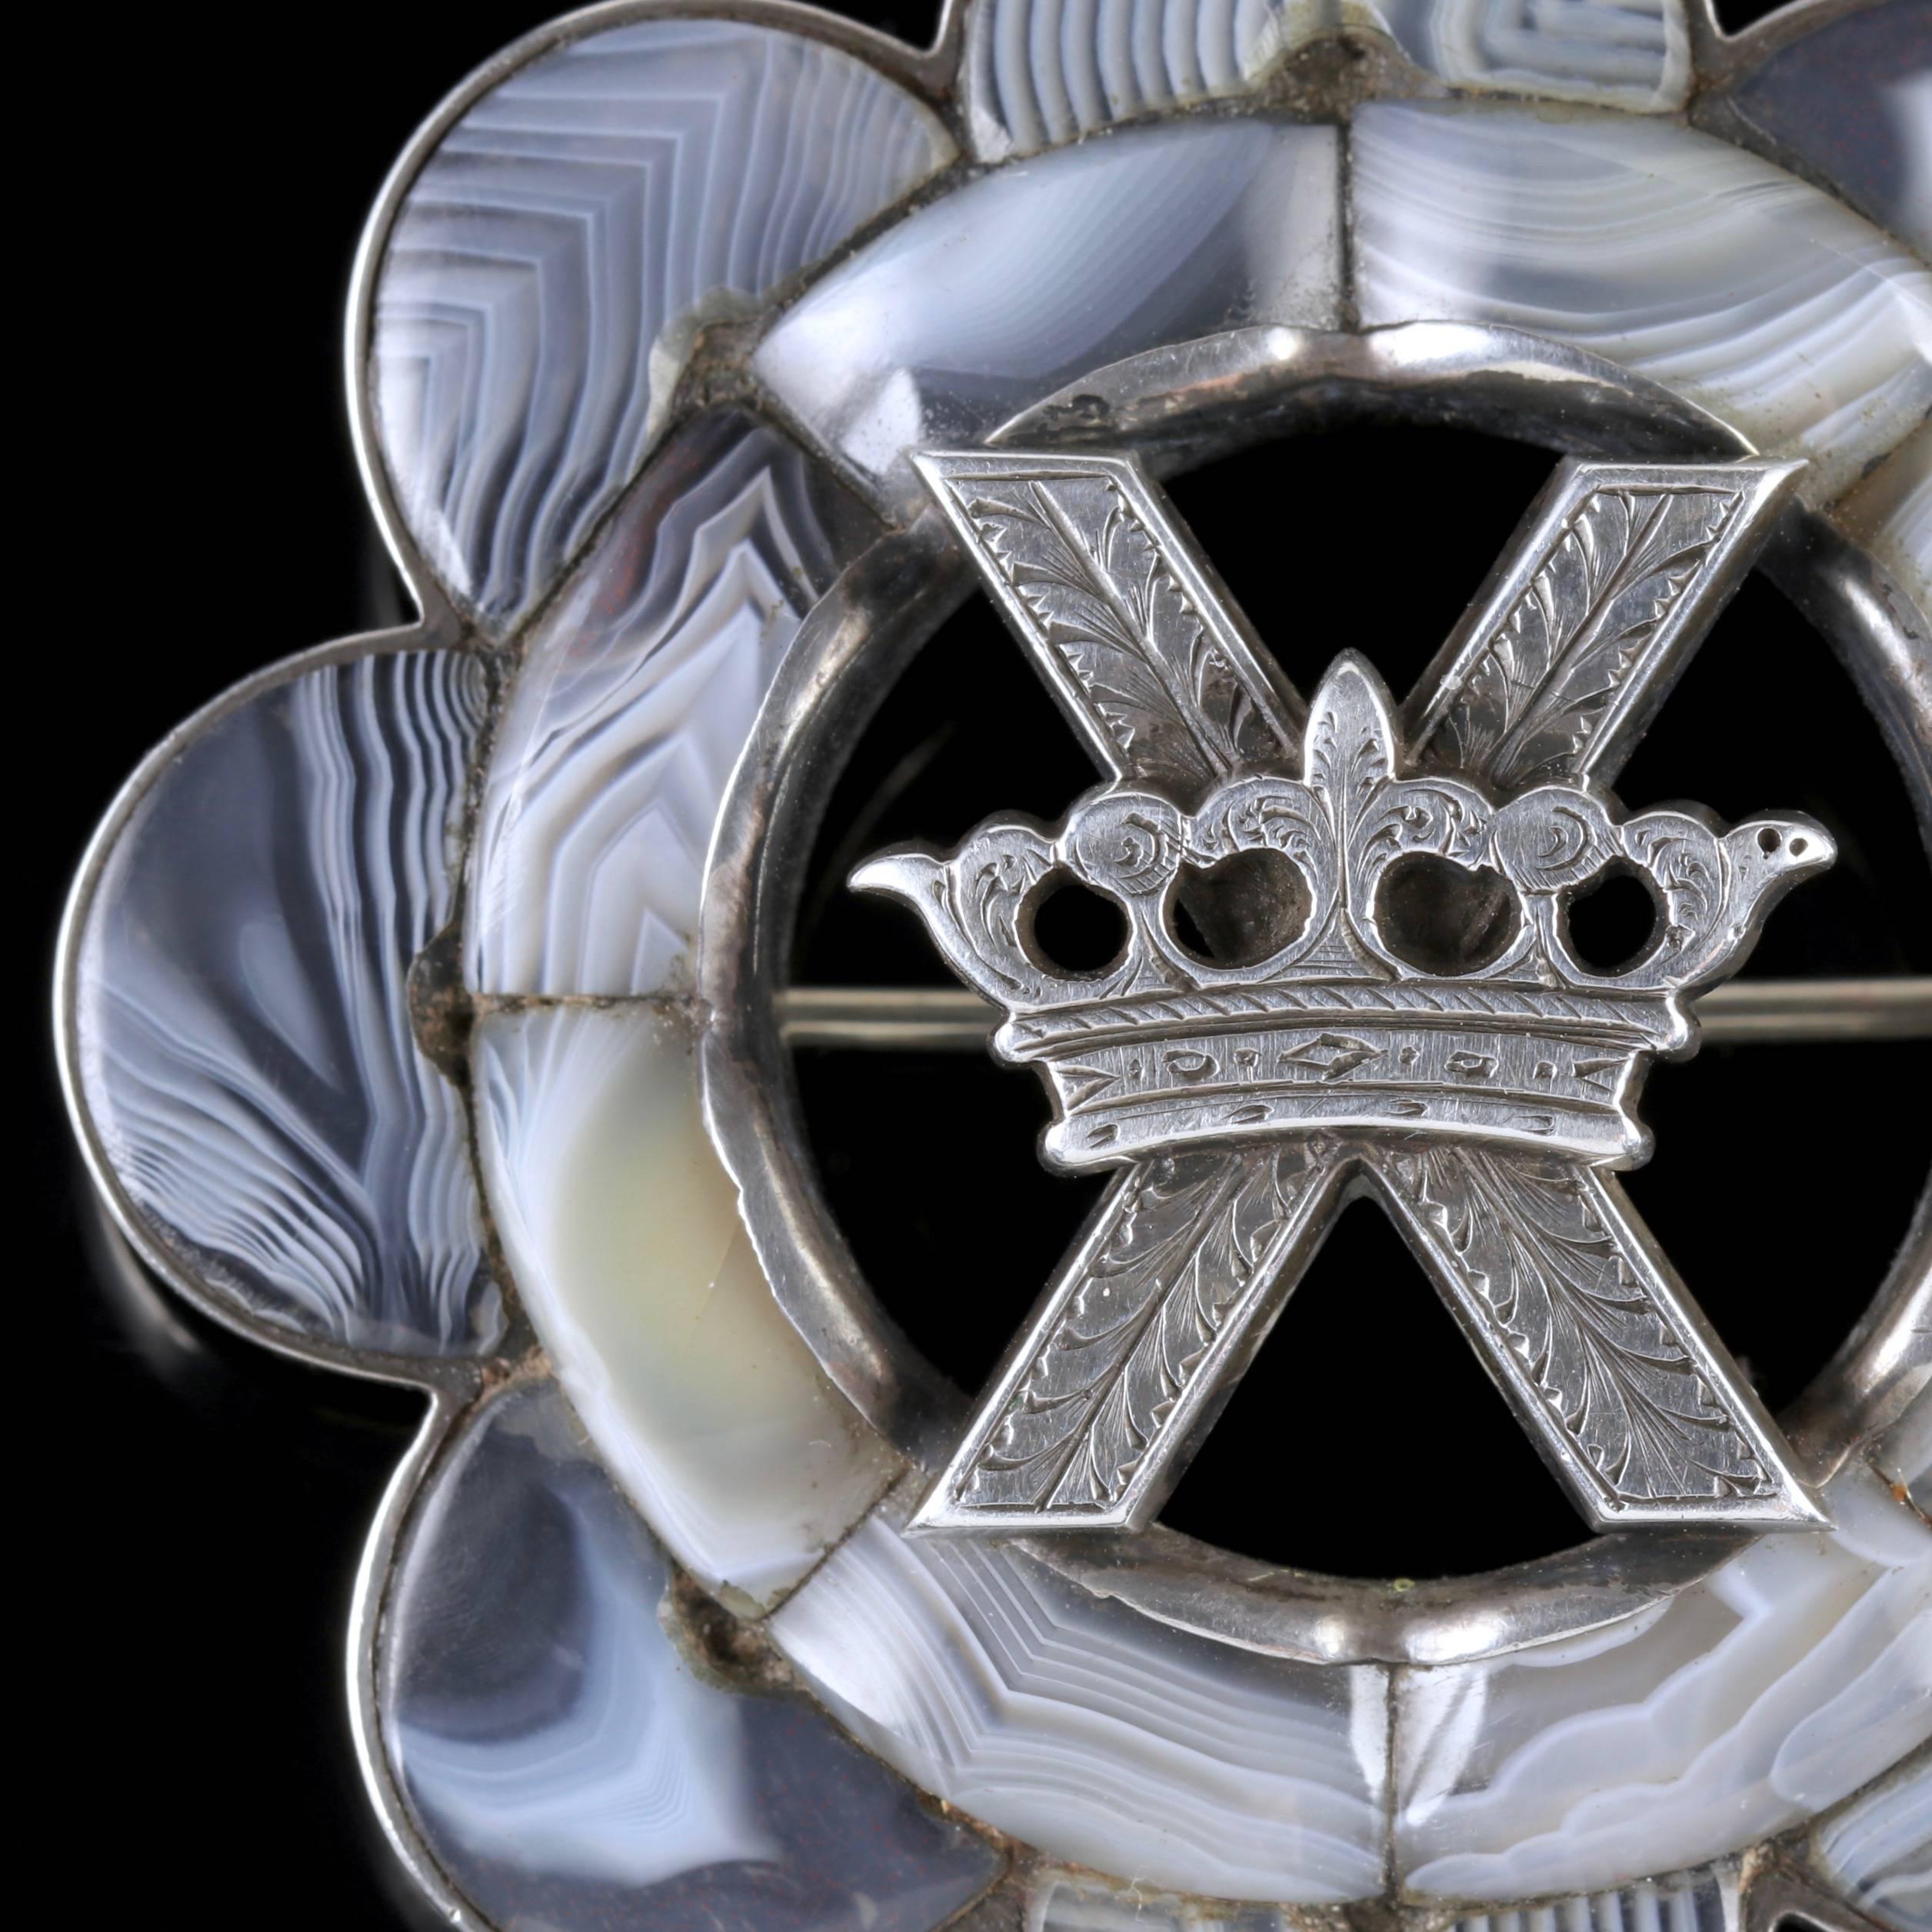 To read more please click continue reading below-

This magnificent large antique Victorian Scottish Silver and Agate brooch is Circa 1860. 

Scottish jewellery was made popular by Queen Victoria as it became a souvenir of her frequent trips to